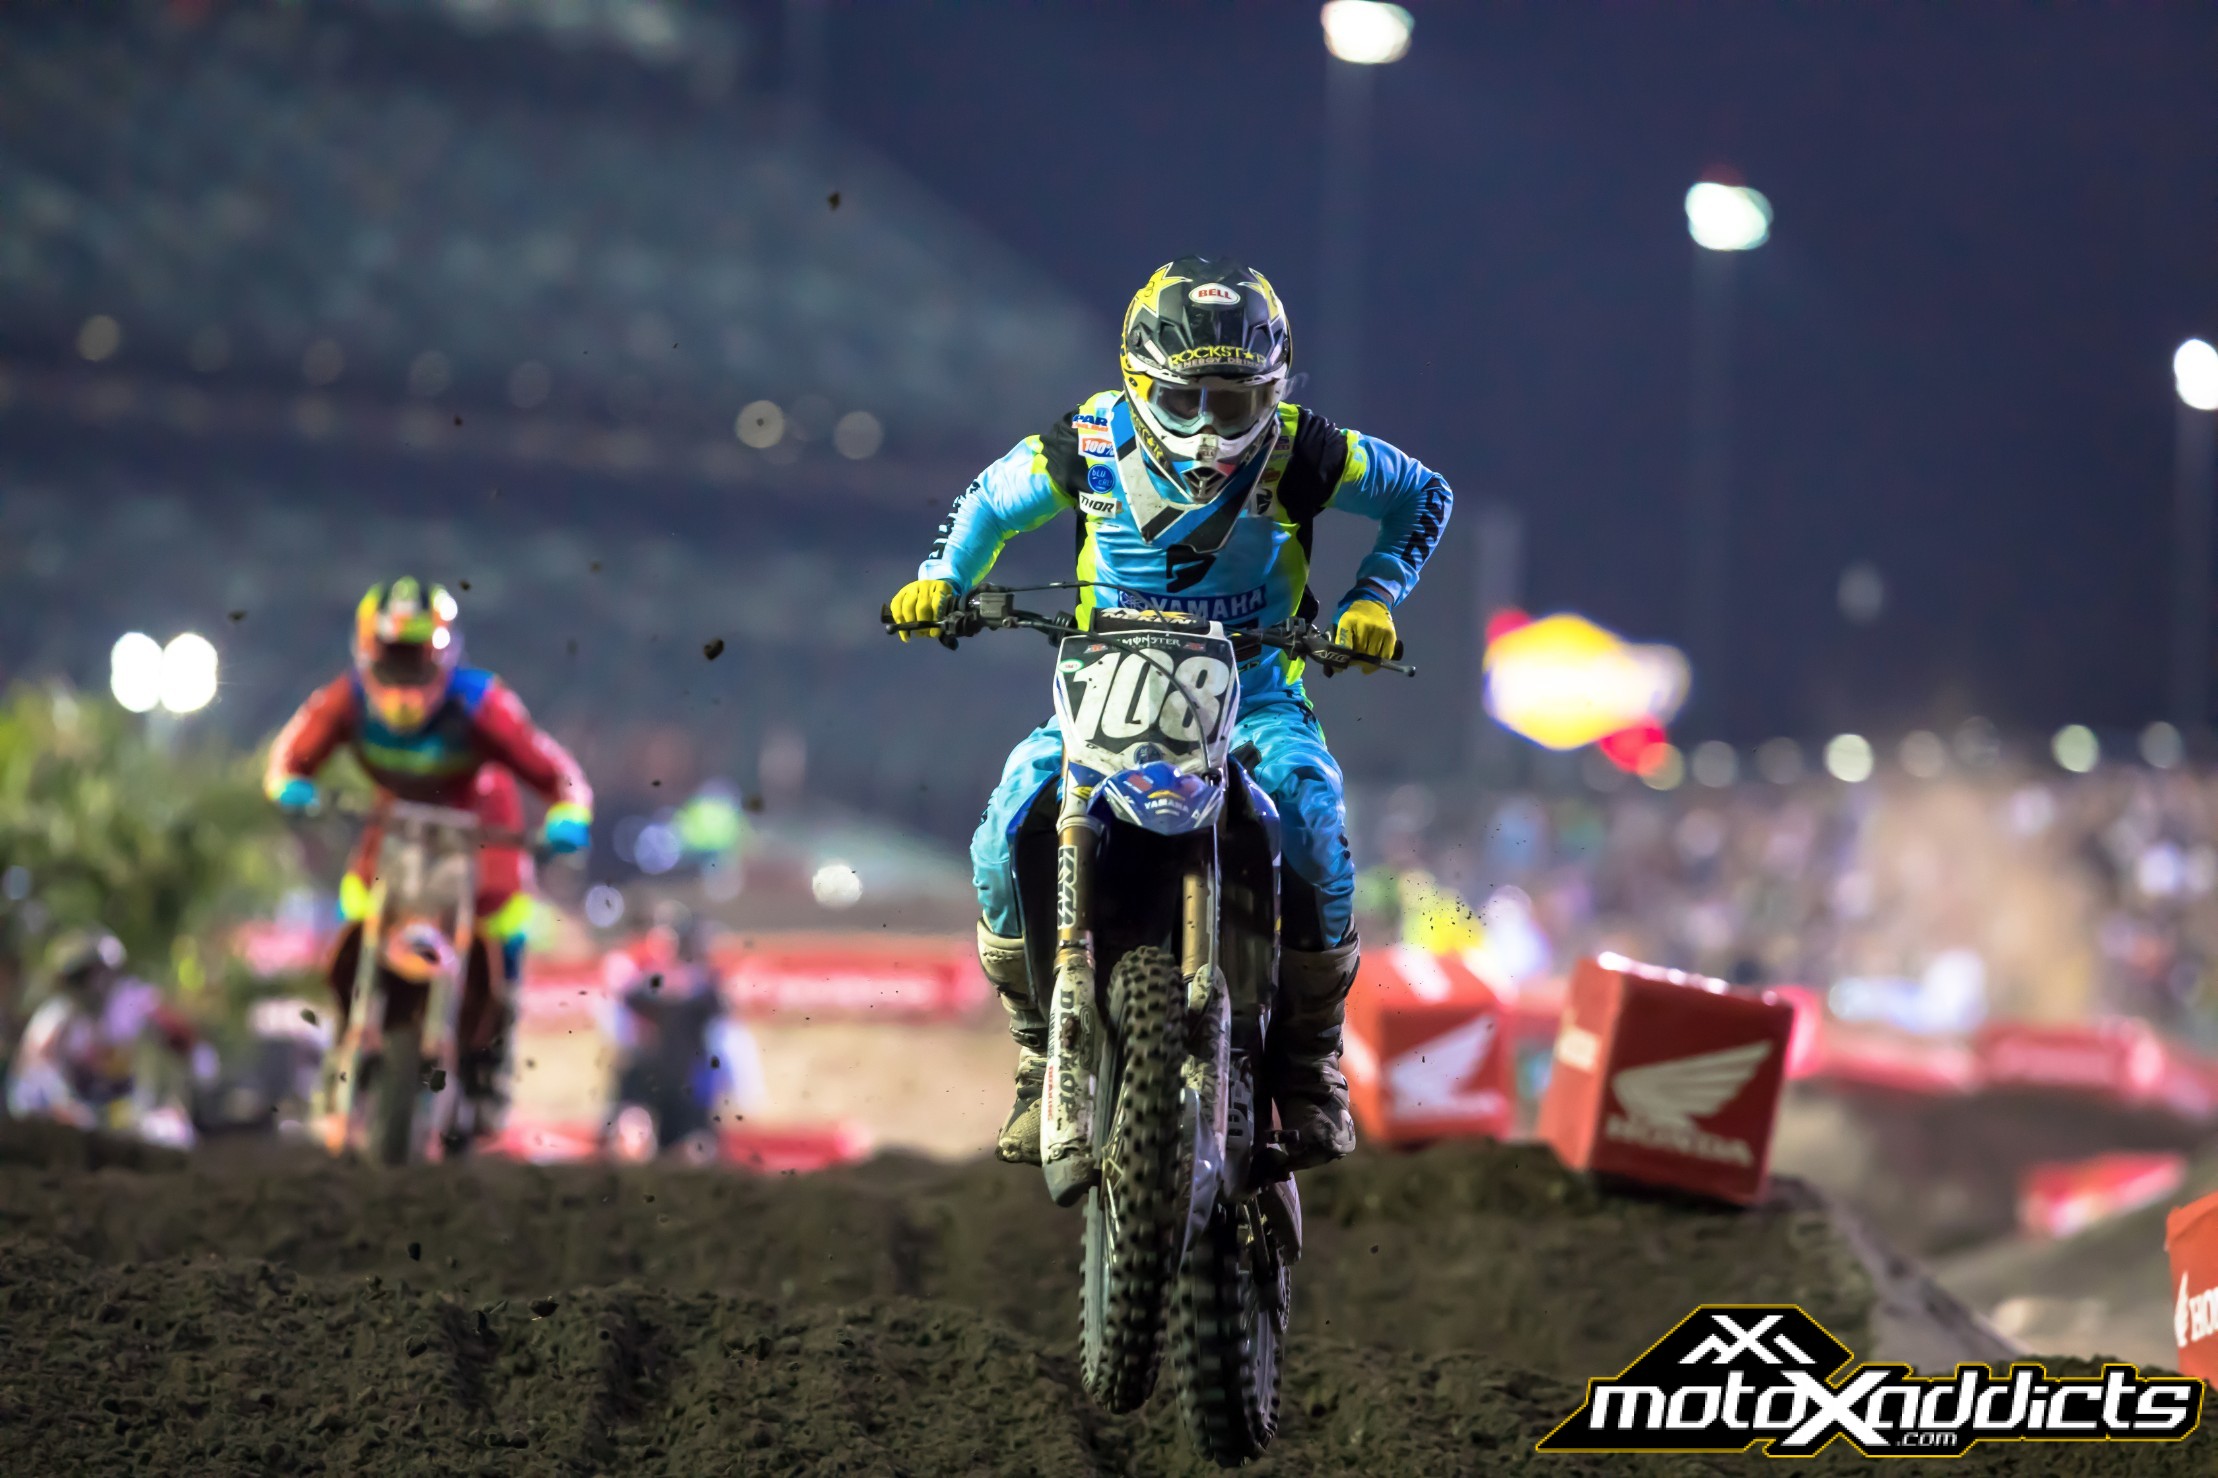 Frenchman Dylan Ferrandis proved to everyone he deserved the factory Yamaha at Star Racing with his first podium in just his rookie season in America. 